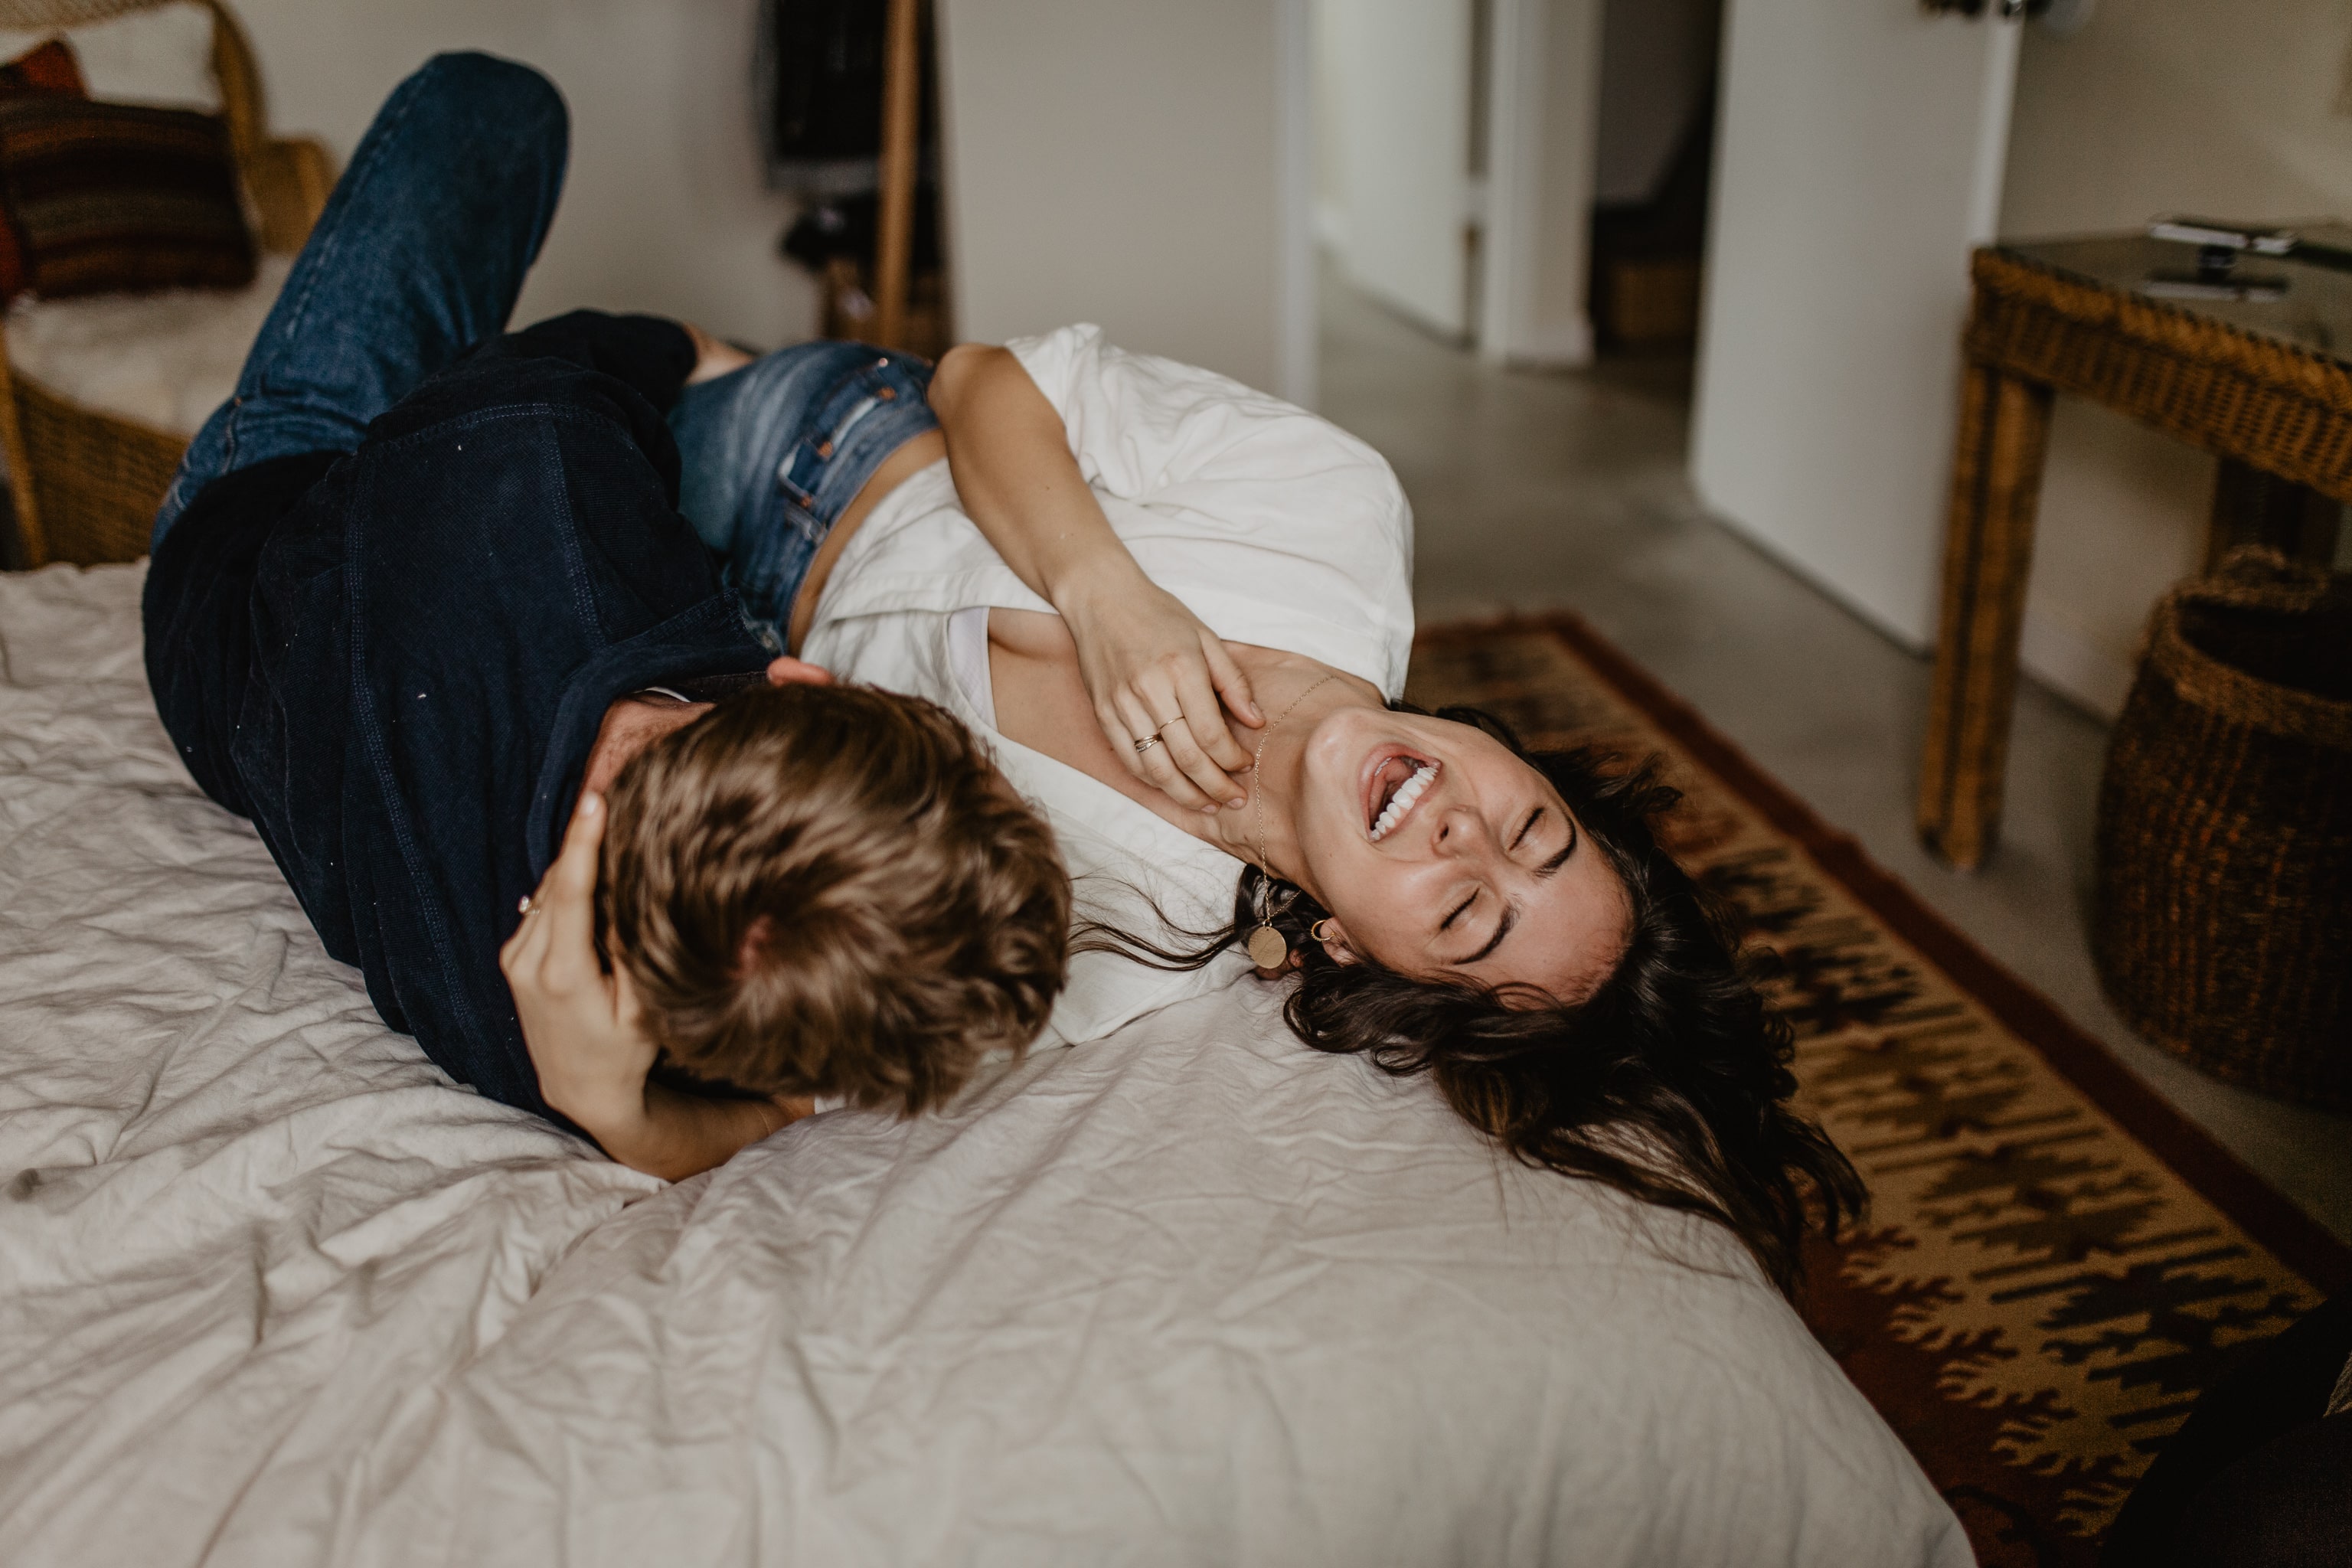 Girl laughing on bed as fiancé hugs her during an in home engagement session with Buffalo based photographer Jessy Herman Photo